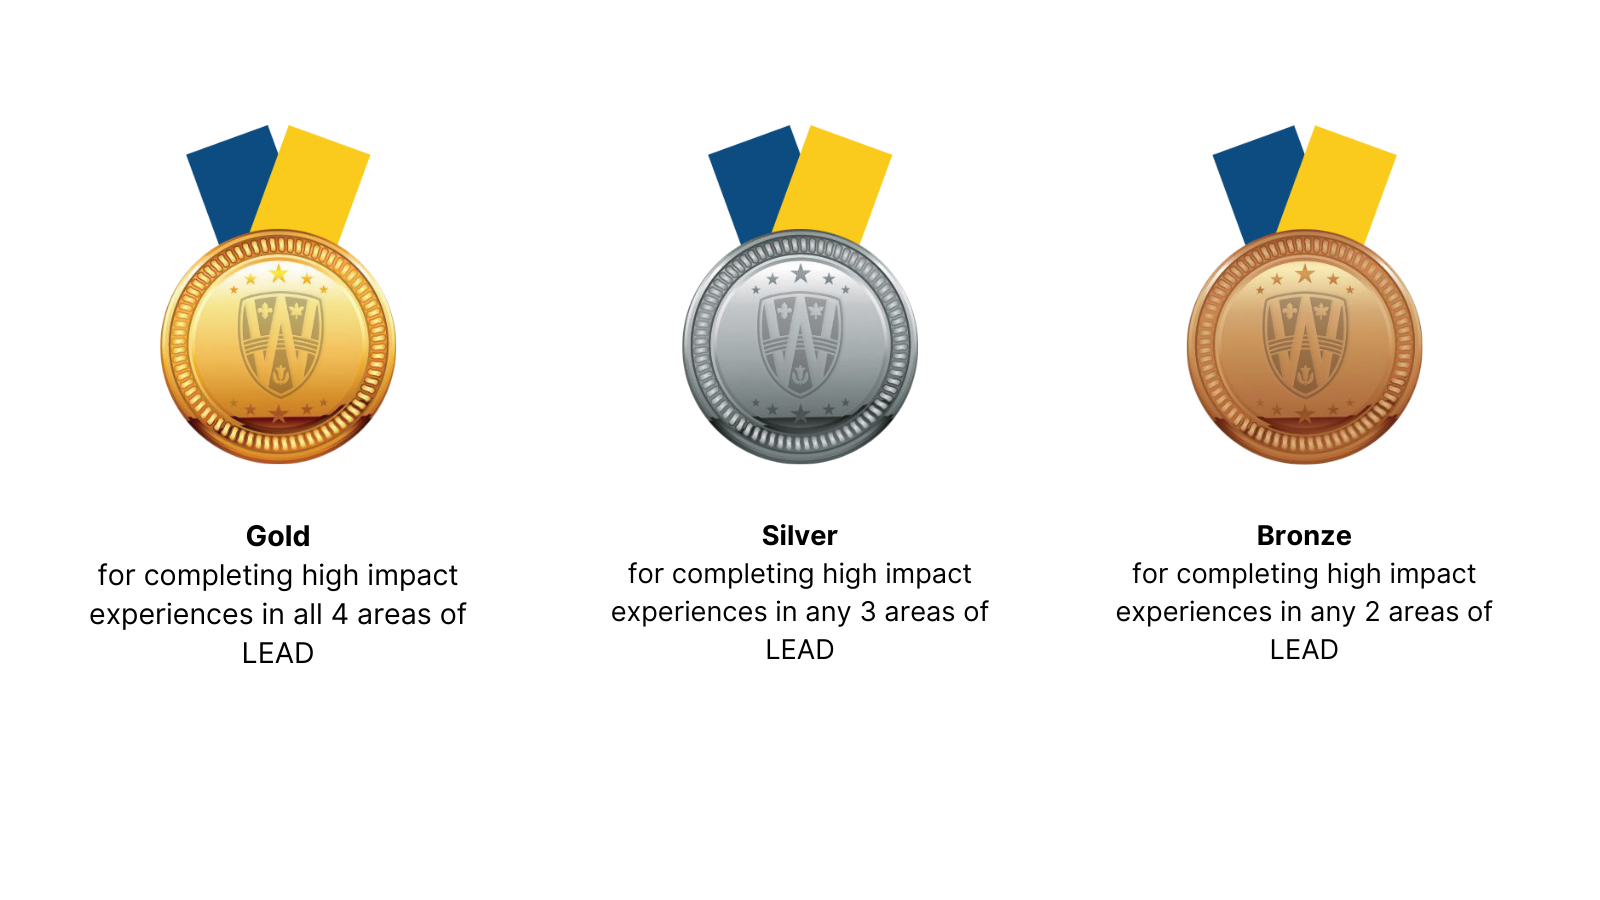 LEAD Scholars Description (Gold for completing high impact experiences in all 4 areas of LEAD; Silver for completing high impact experiences in 3 areas of LEAD; Bronze for completing high impact experiences in 2 areas of LEAD)